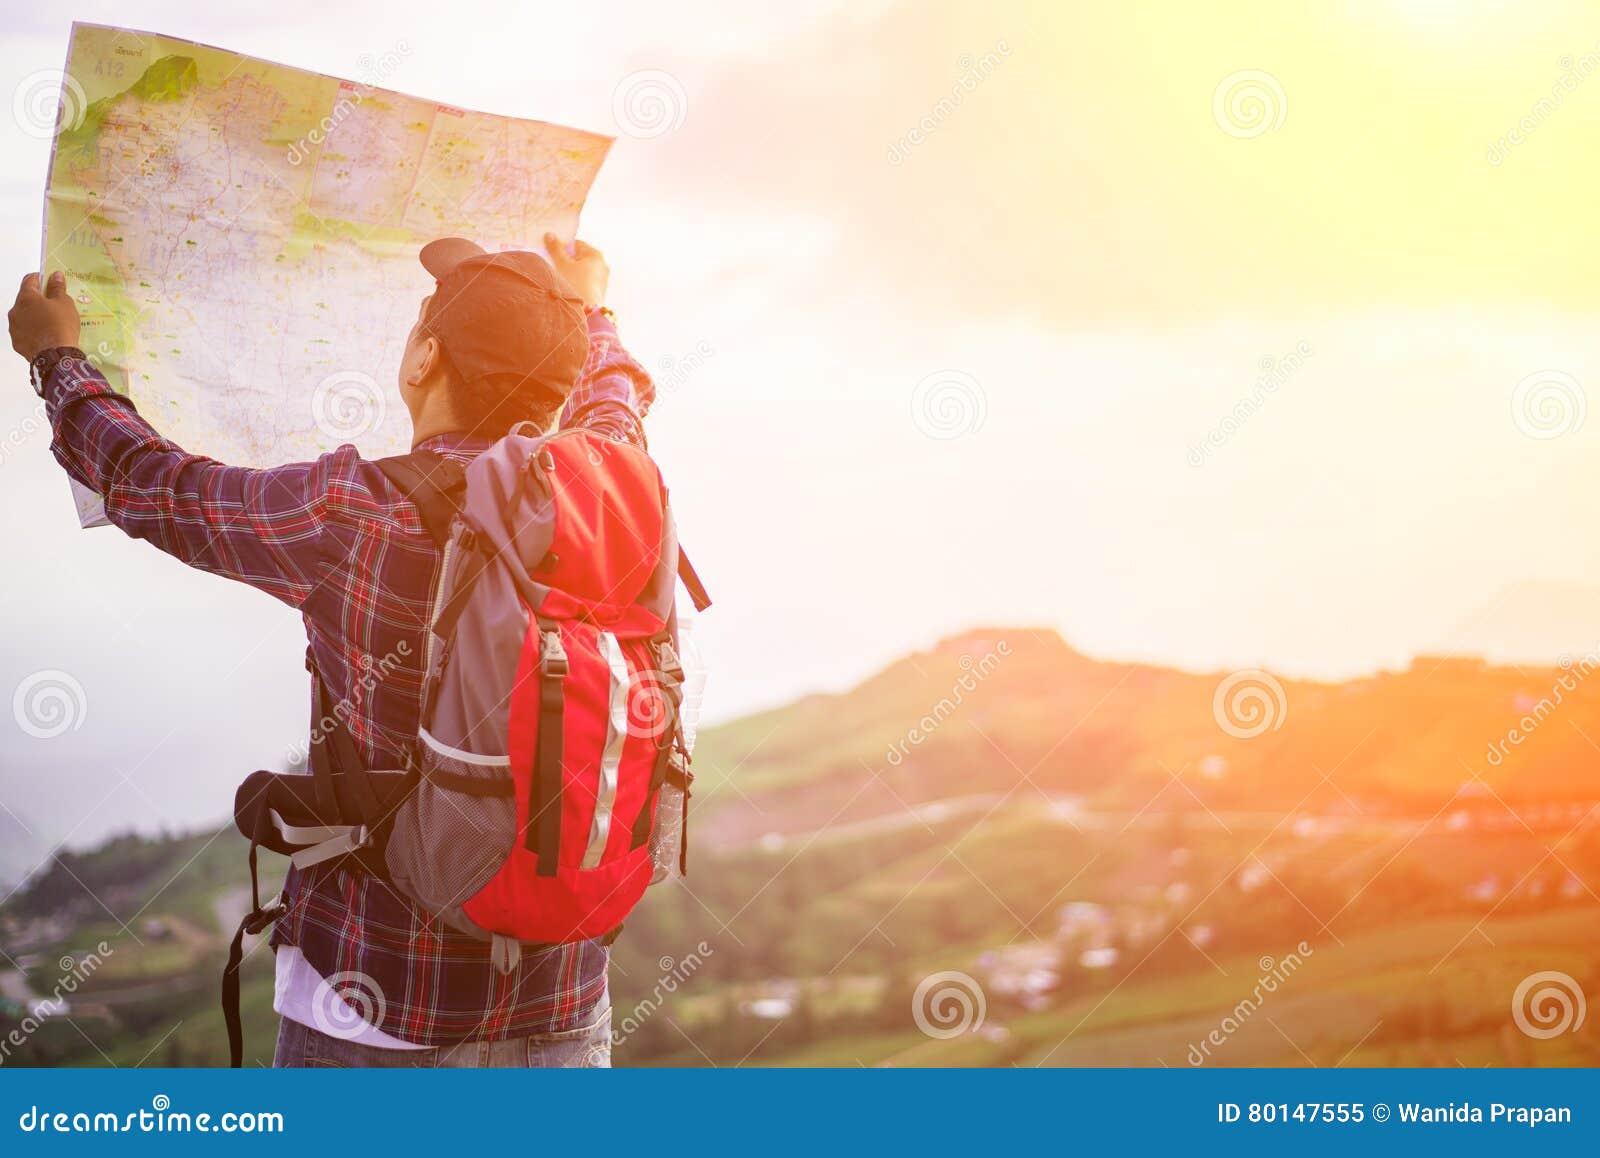 lost hiker with backpack checks map to find directions